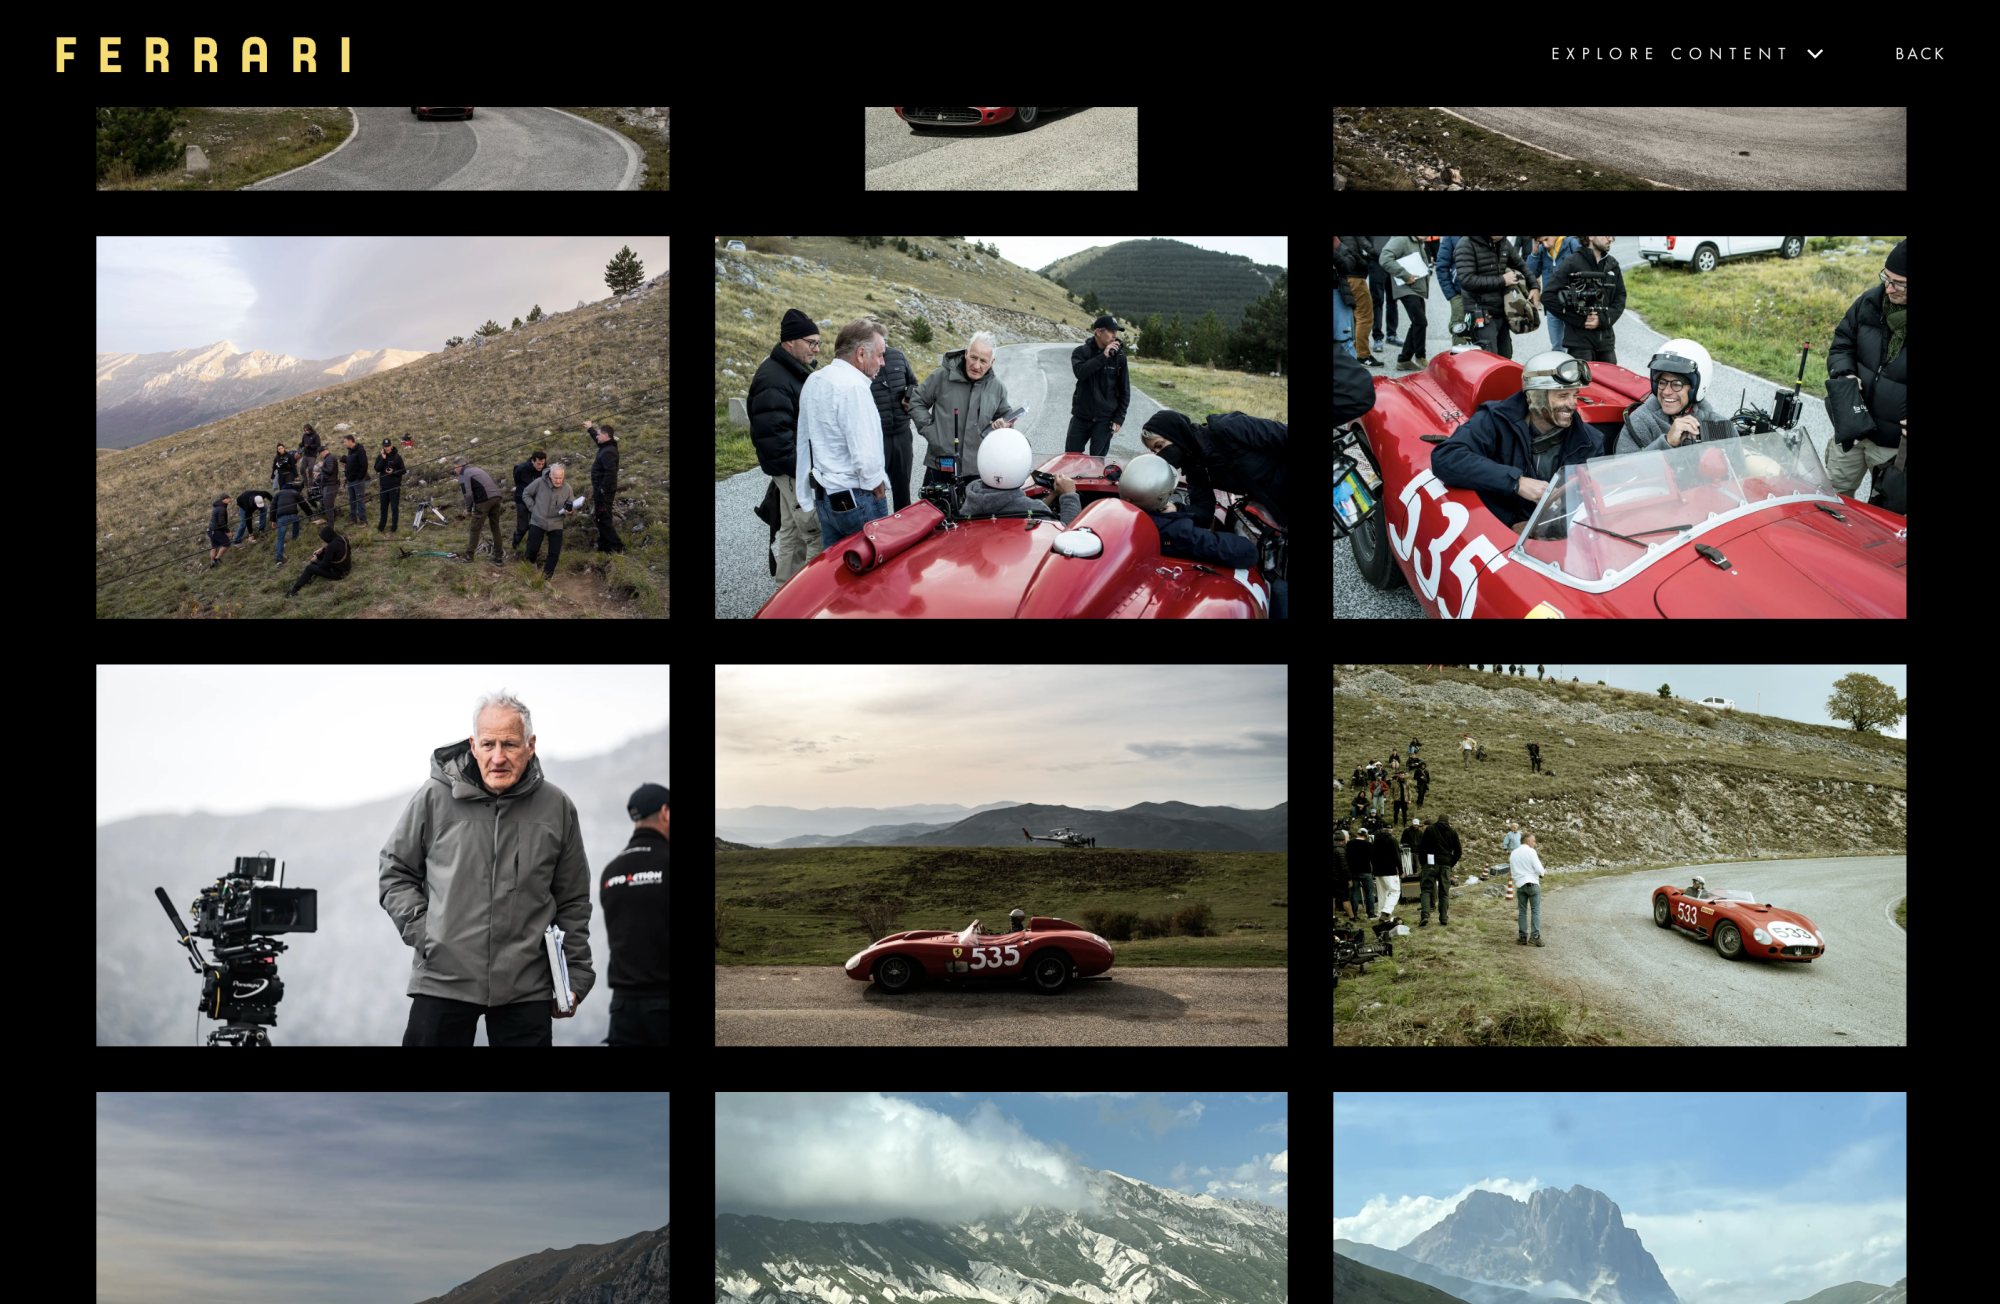 Images detail the making of a racing sequence in a movie.